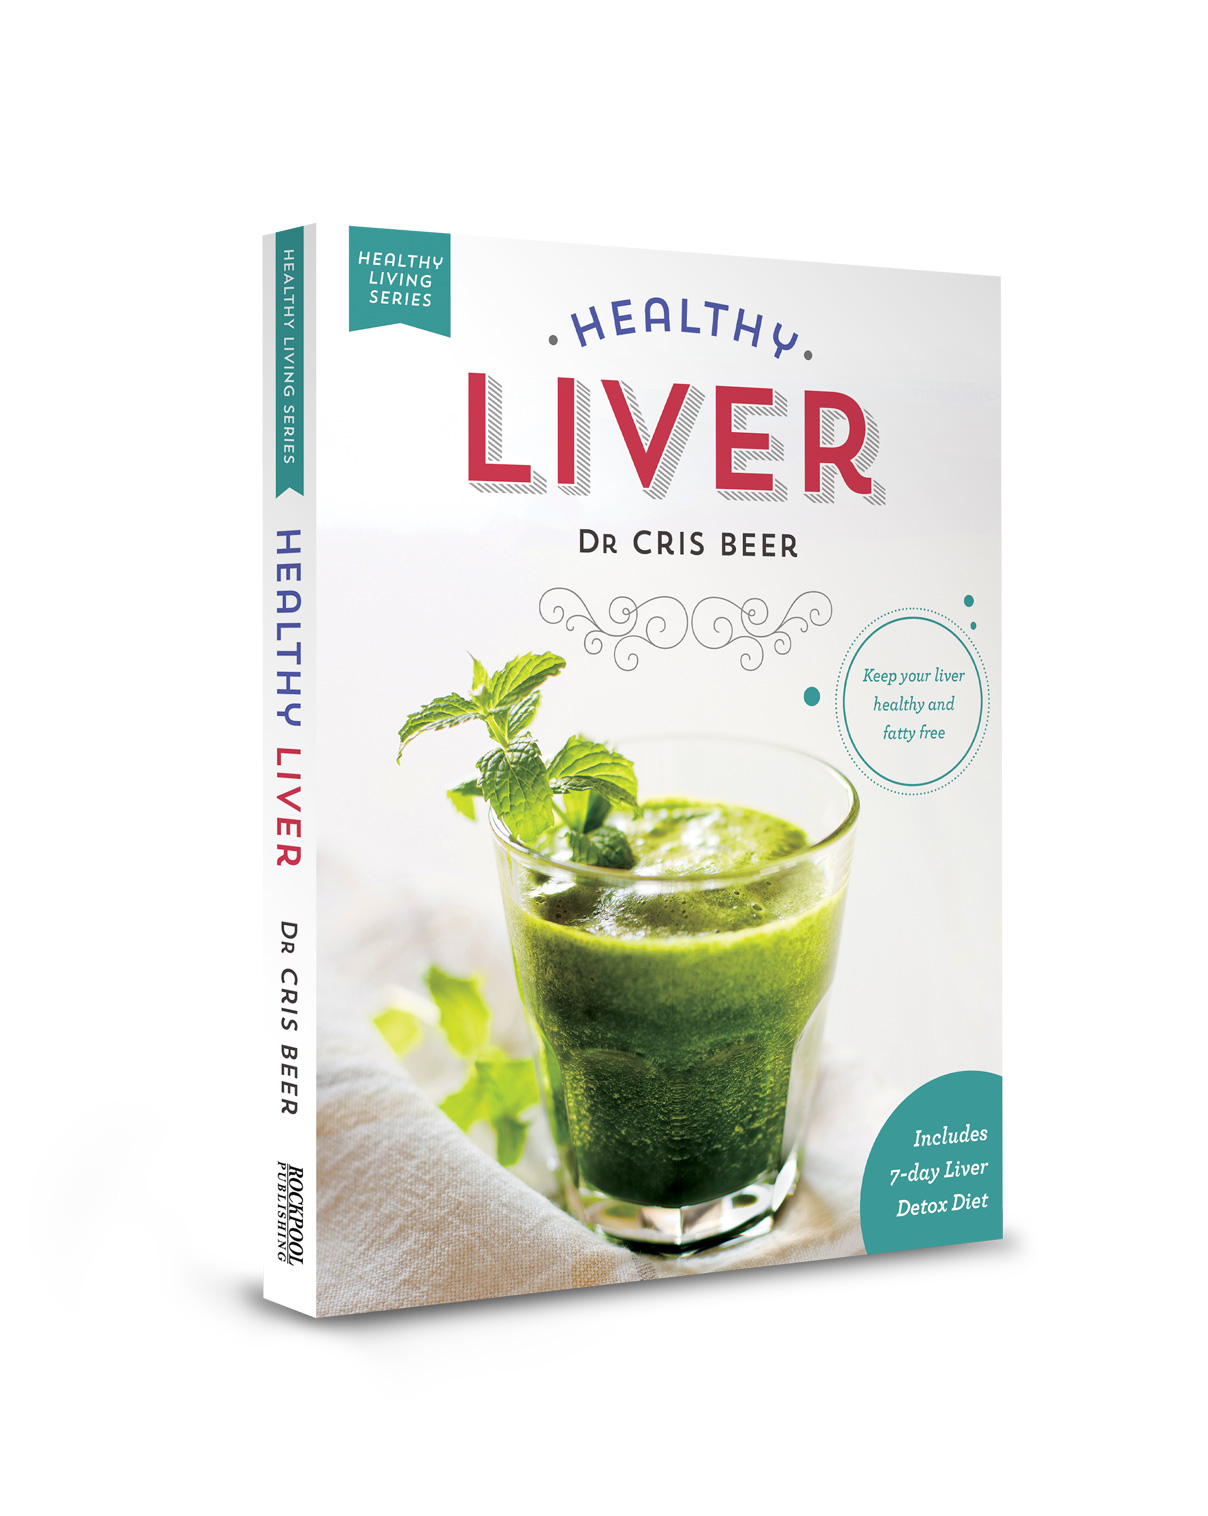 Healthy Liver by Dr. Cris Beer